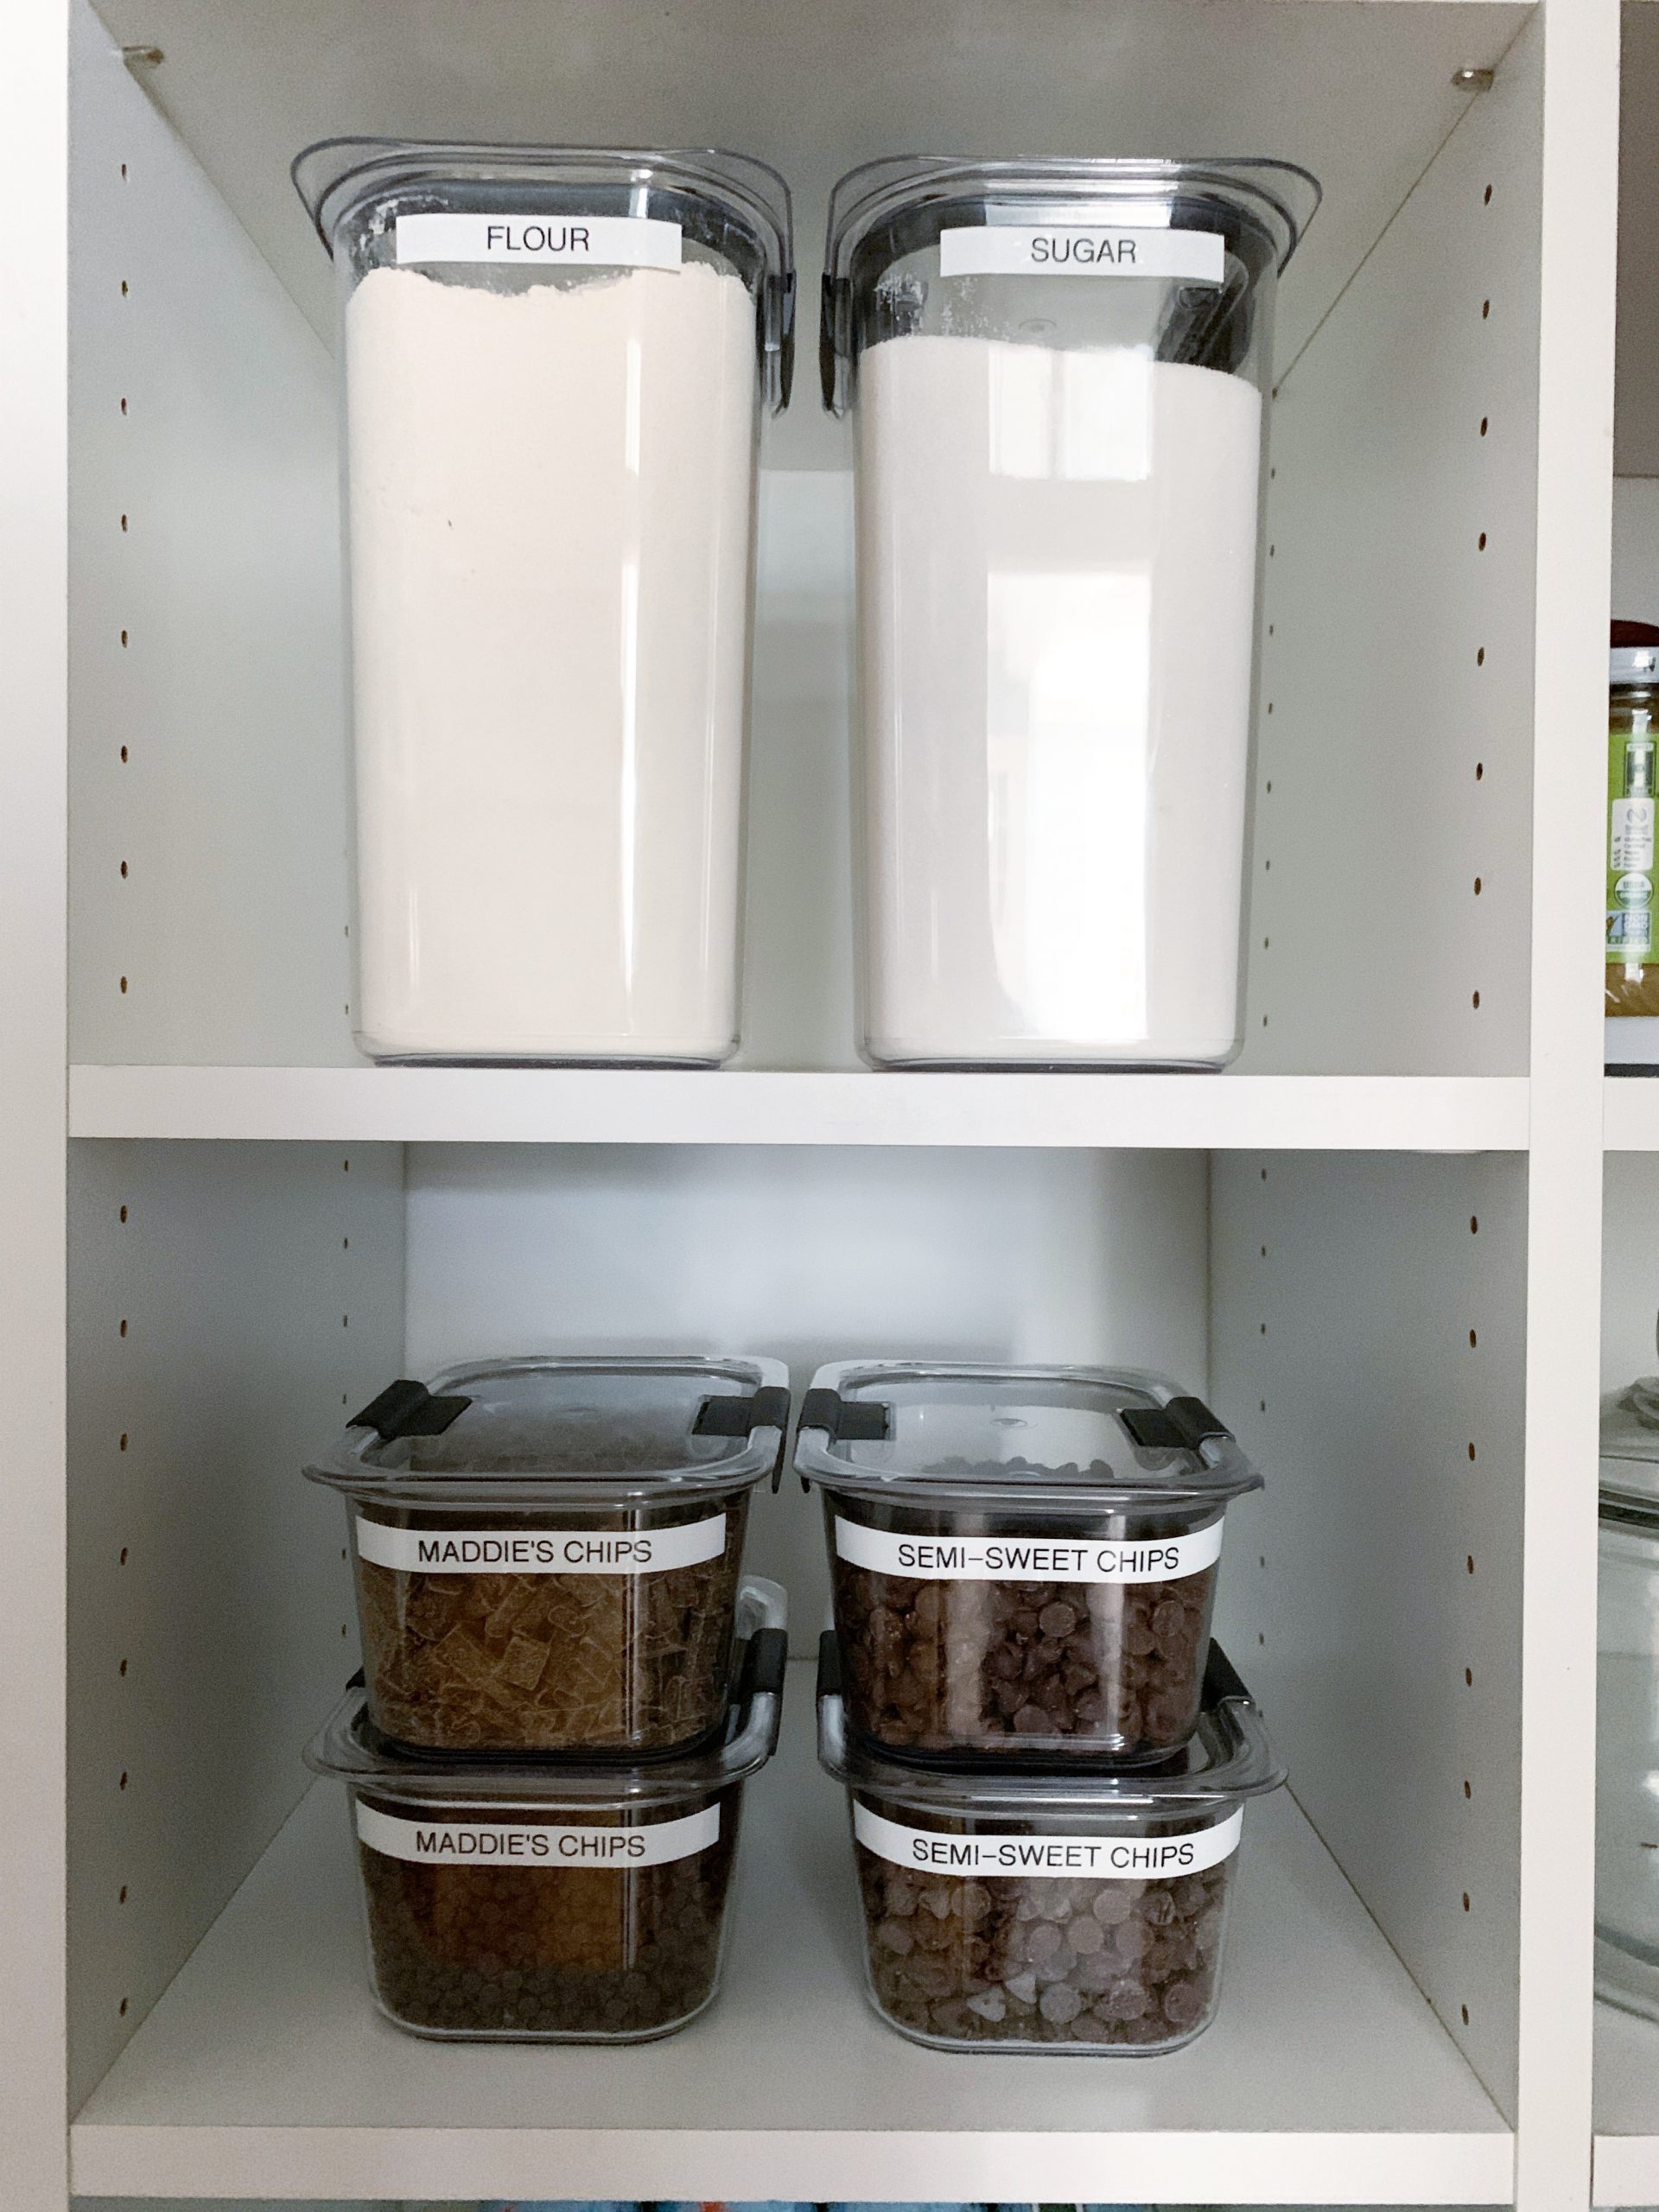 https://simplyorganized.me/wp-content/uploads/2020/04/rubbermaid-pantry-containers-scaled.jpg